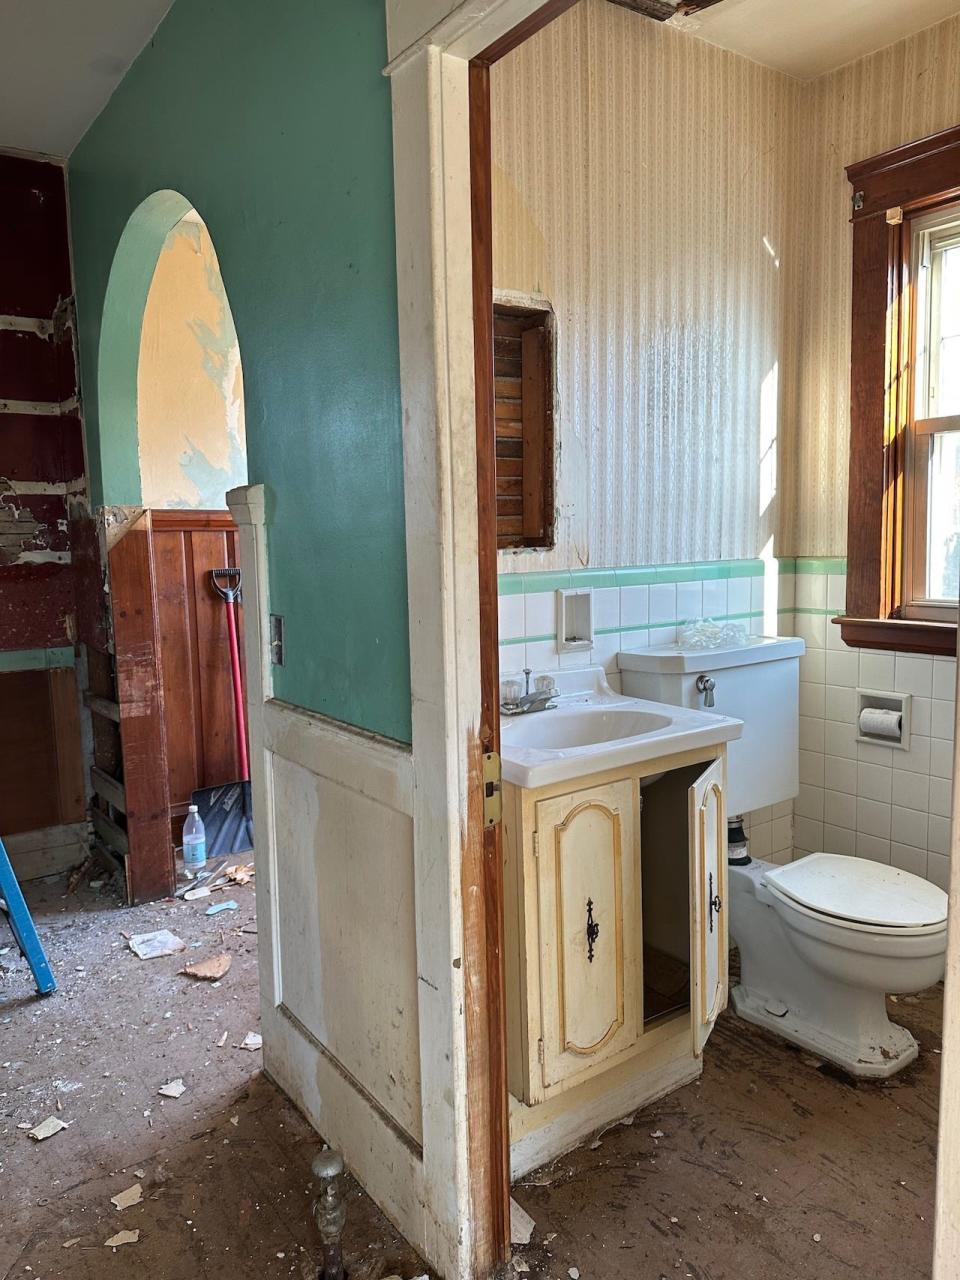 A bathroom in a cottage during construction with bits of dirty and dust lining the floor.